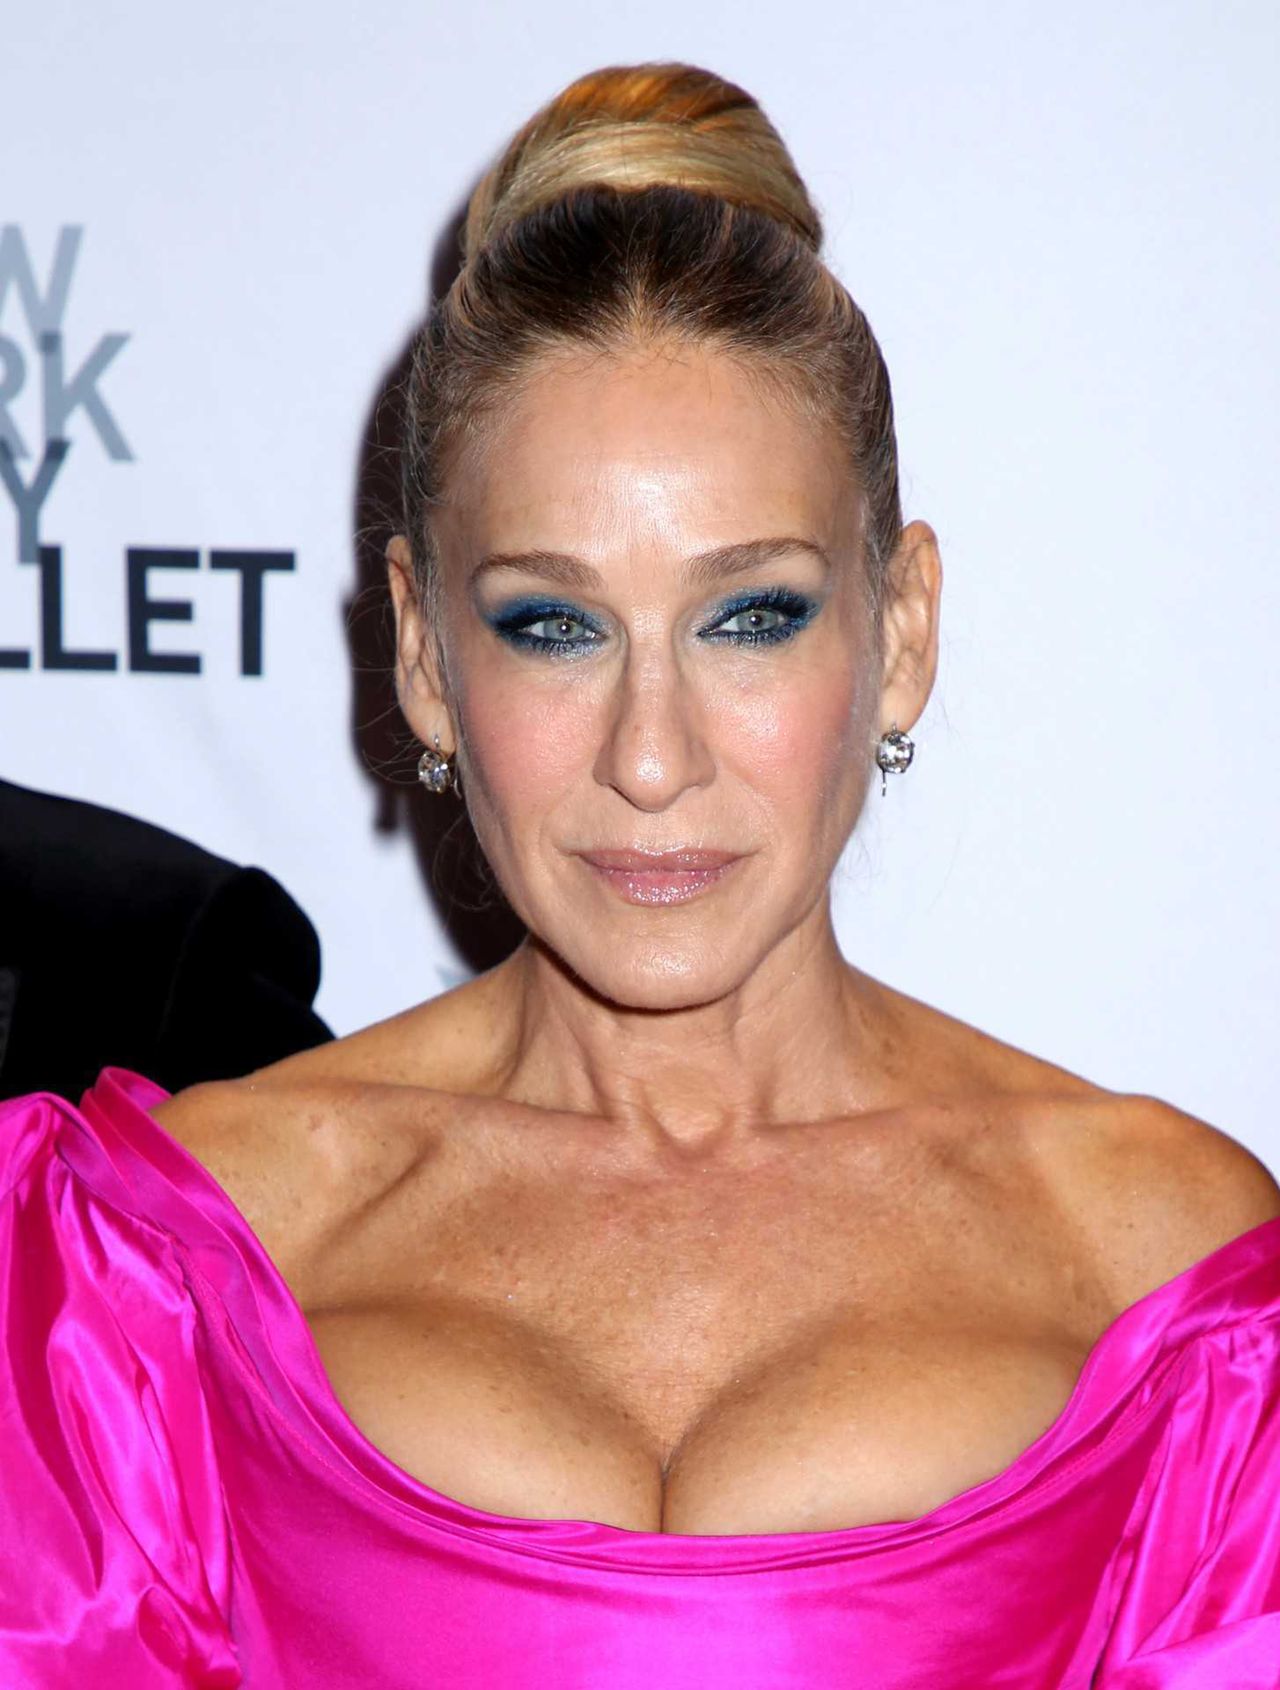 Sarah Jessica Parker attending the New York City Ballet Fall Fashion Gala held at the David H. Koch Theater at Lincoln Center on September 26, 2019 in New York City, NY
©Steven Bergman/AFF-USA.COM